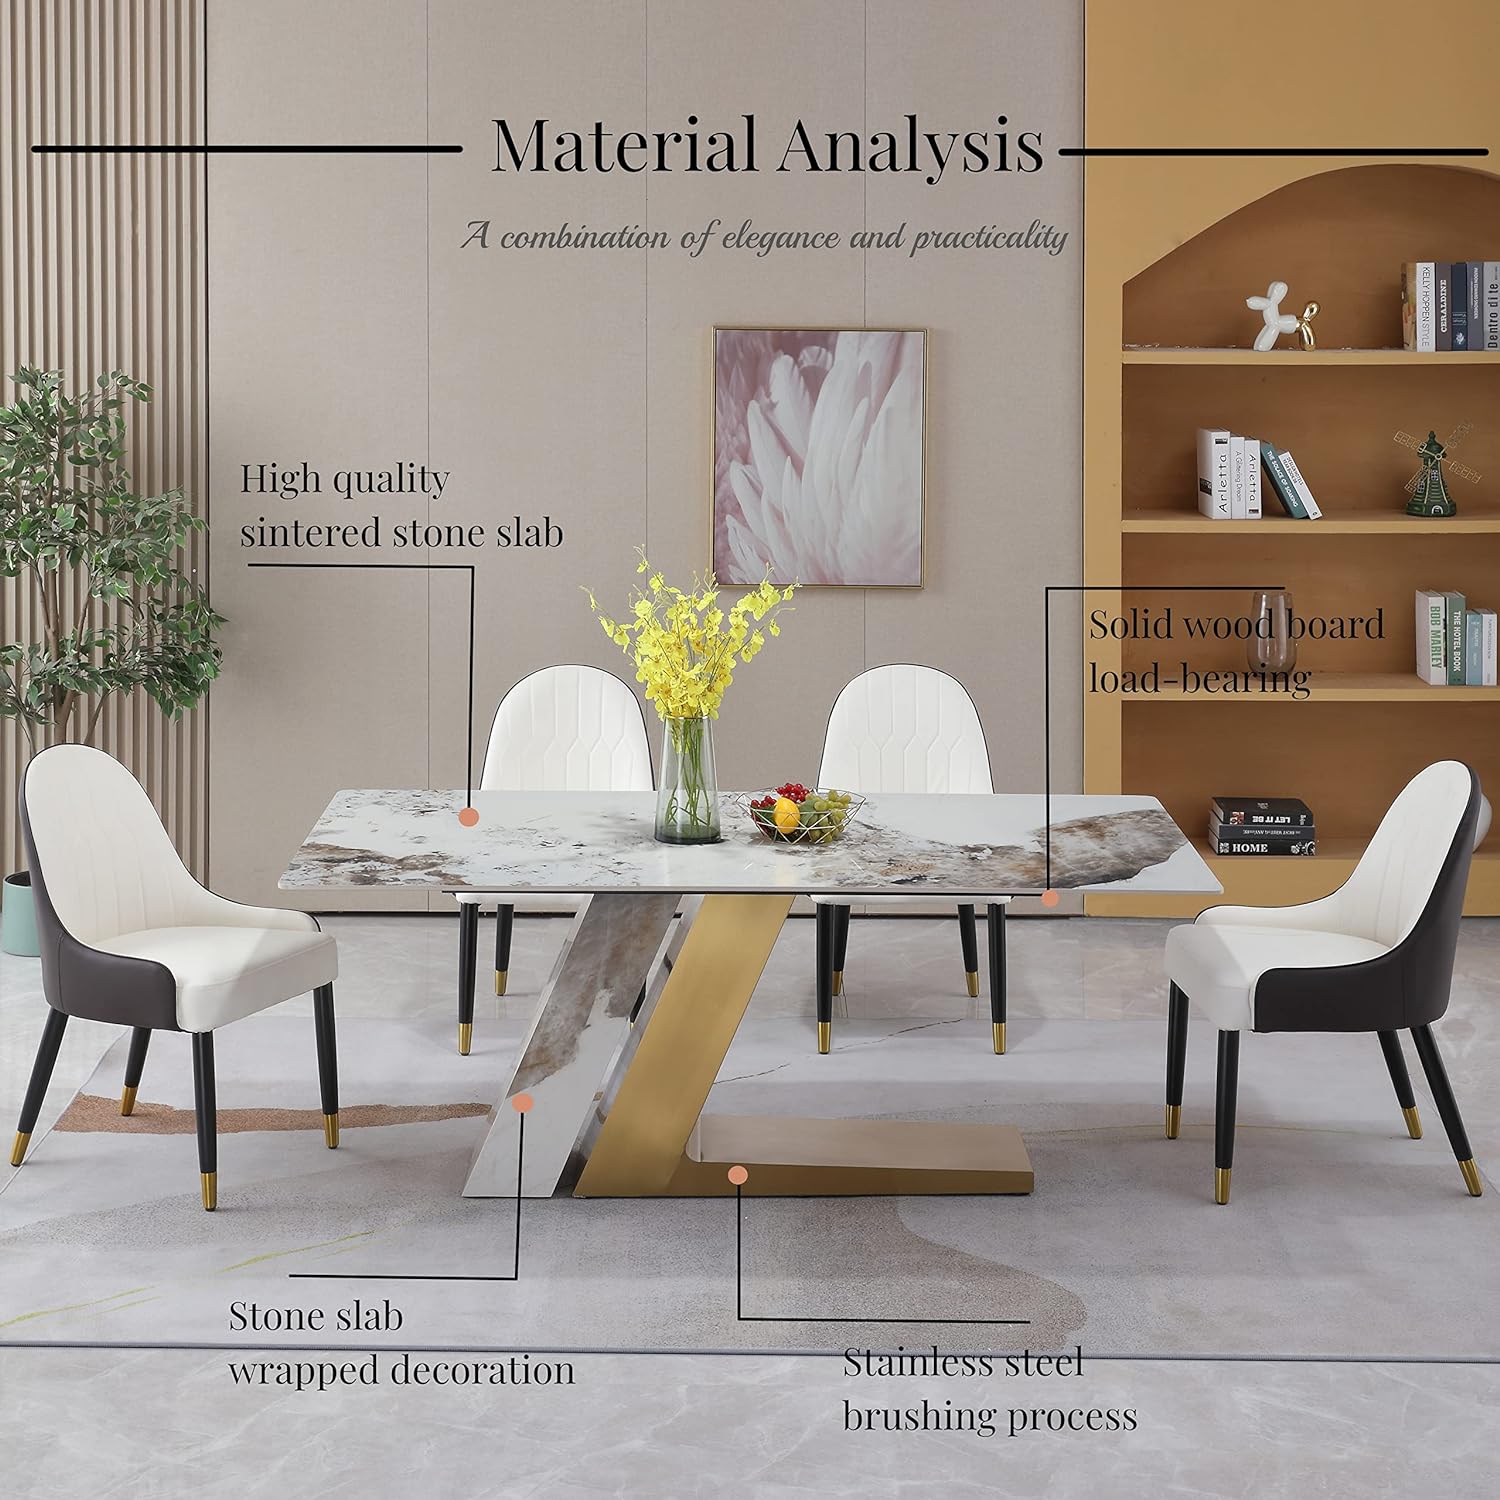 7 Piece Dining Table Set, Modern Dining Room Table and Chairs Set, Sintered Stone Dining Table Set for 6, Pandora Marble Dining Table with 6 Chairs for Kitchen, Dining Room